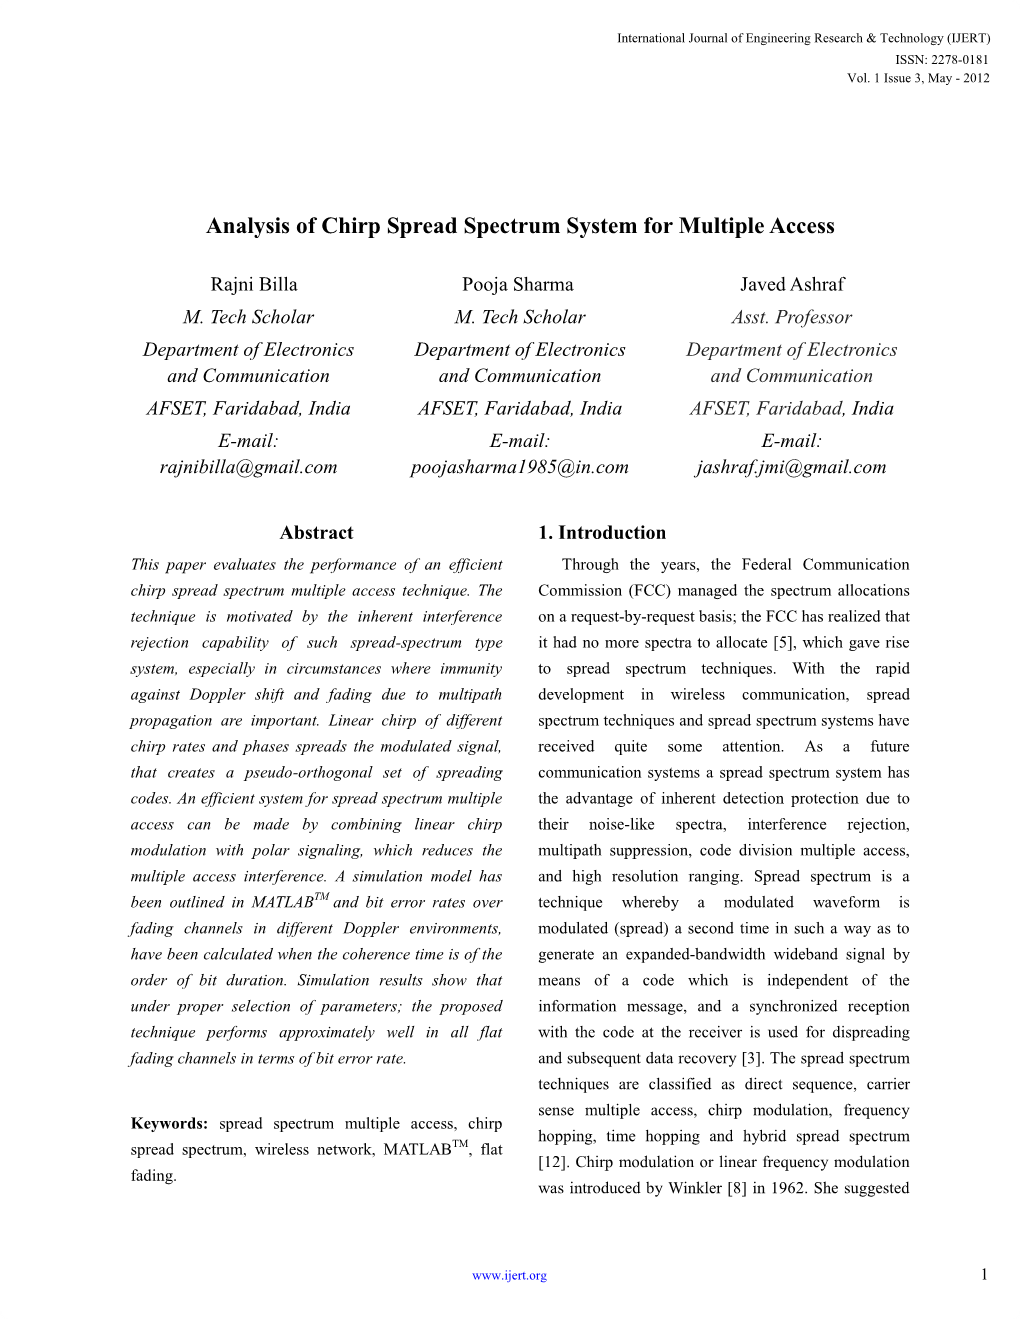 Analysis of Chirp Spread Spectrum System for Multiple Access